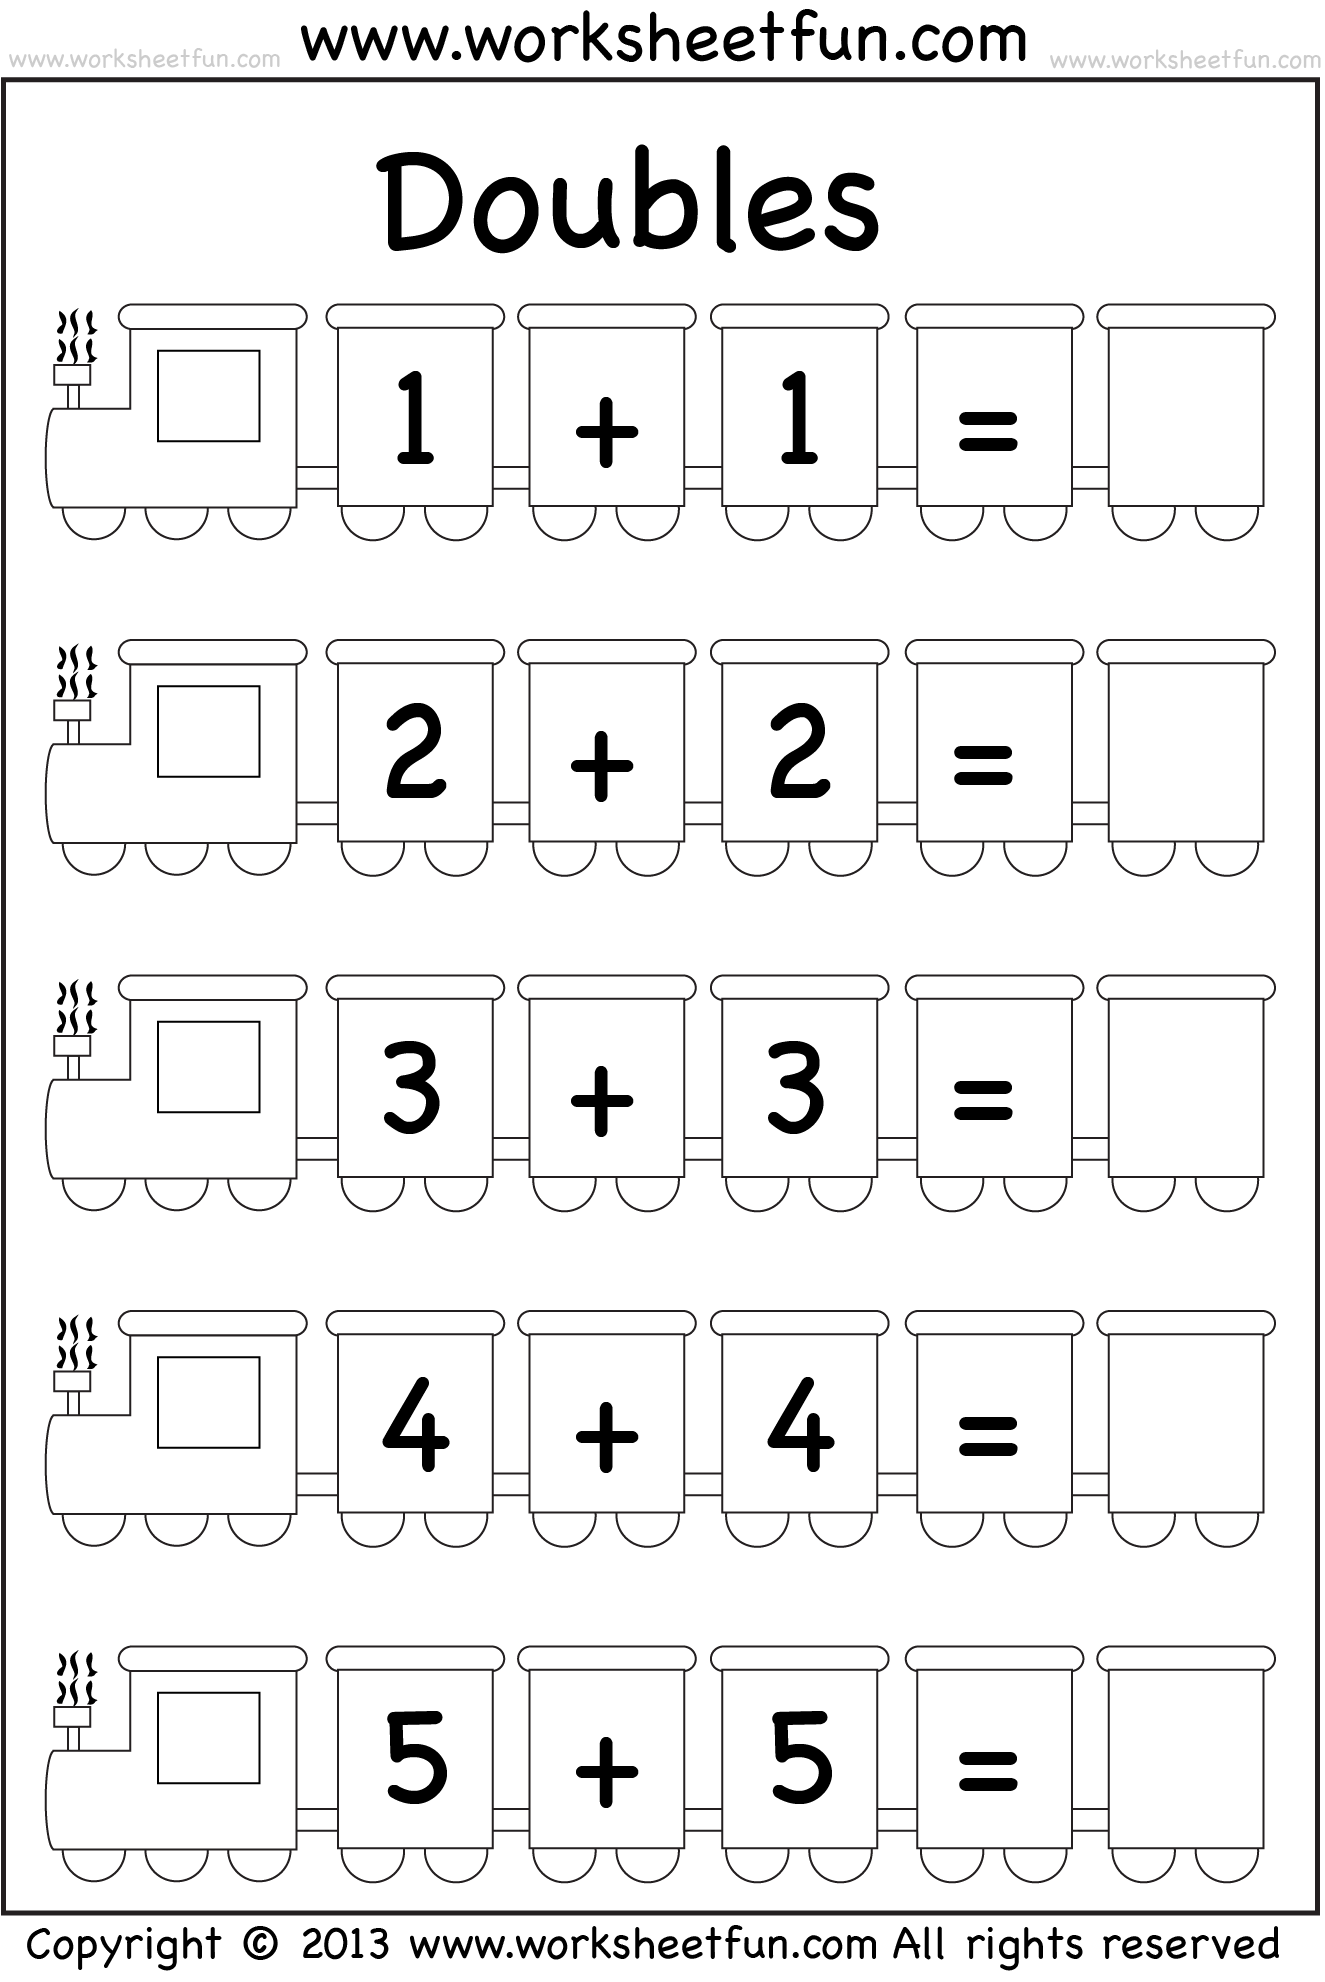 Addition Doubles – 20 Worksheet / FREE Printable Worksheets In Doubles Plus One Worksheet